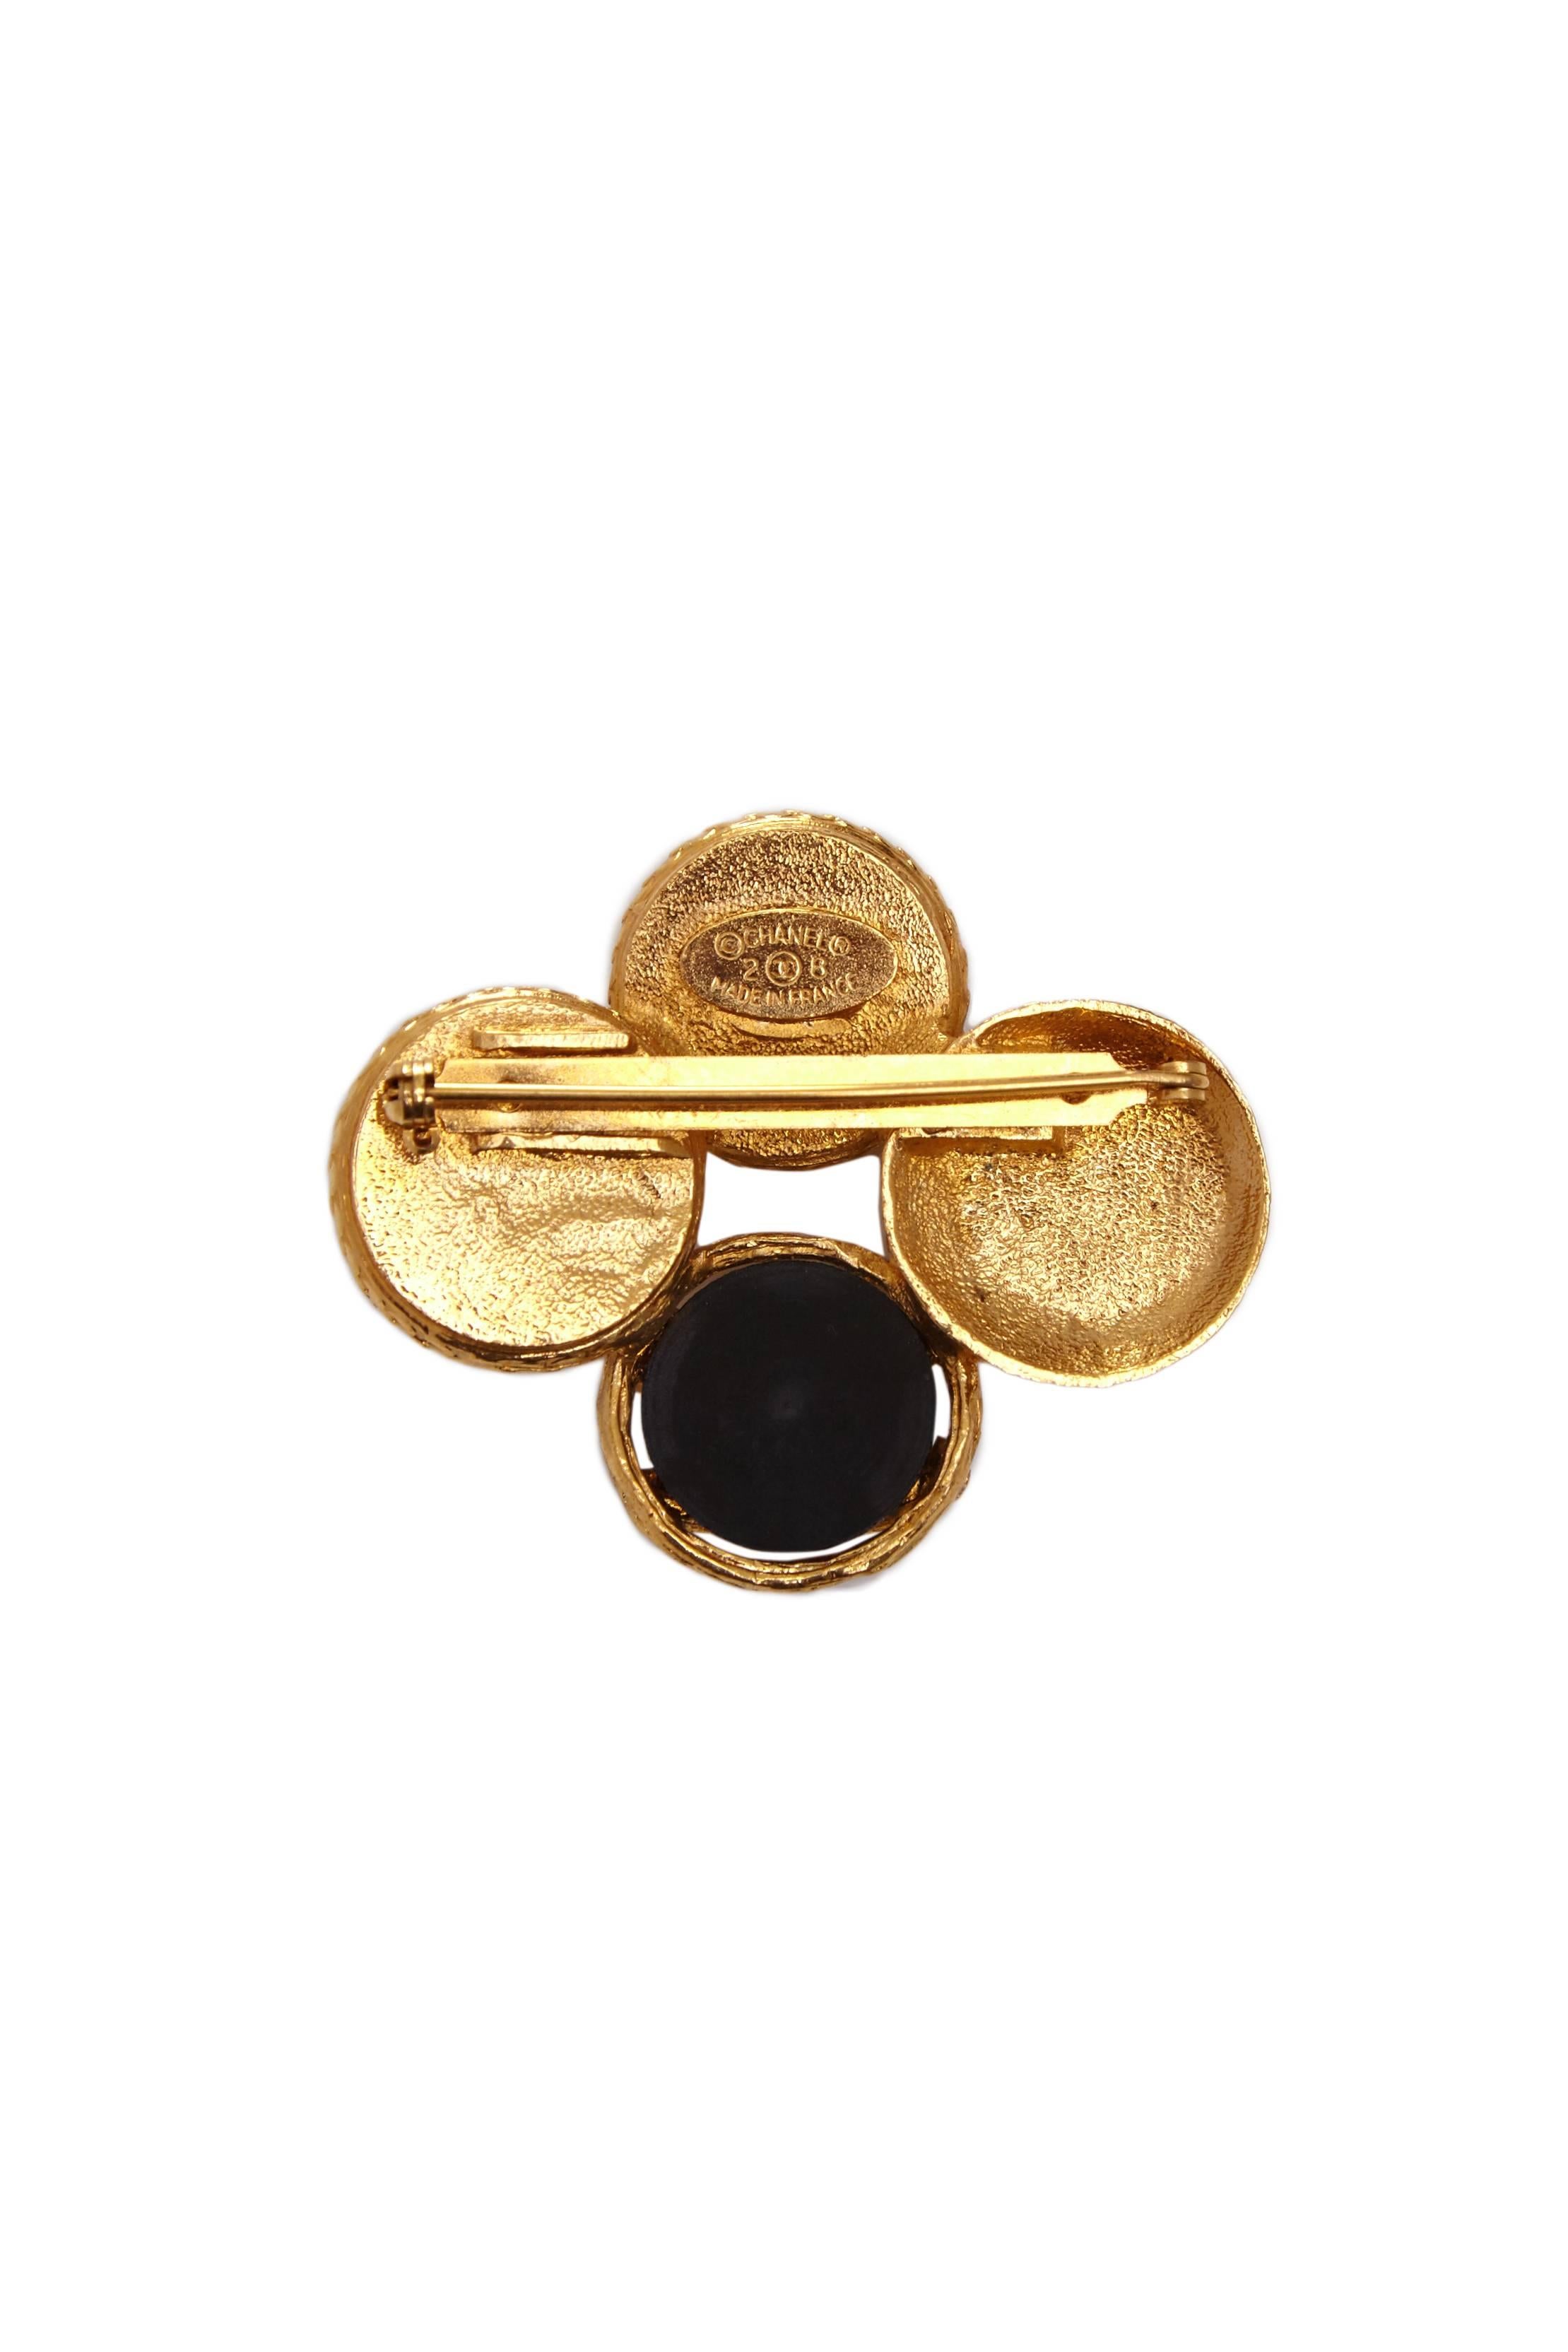 Classic Chanel in style this vintage 1990s brooch is made up of four discs joined together in black and gold tone metal.  On the back it is stamped season 28 dating it to 1993.  In excellent condition with no flaws to mention and comes with Chanel